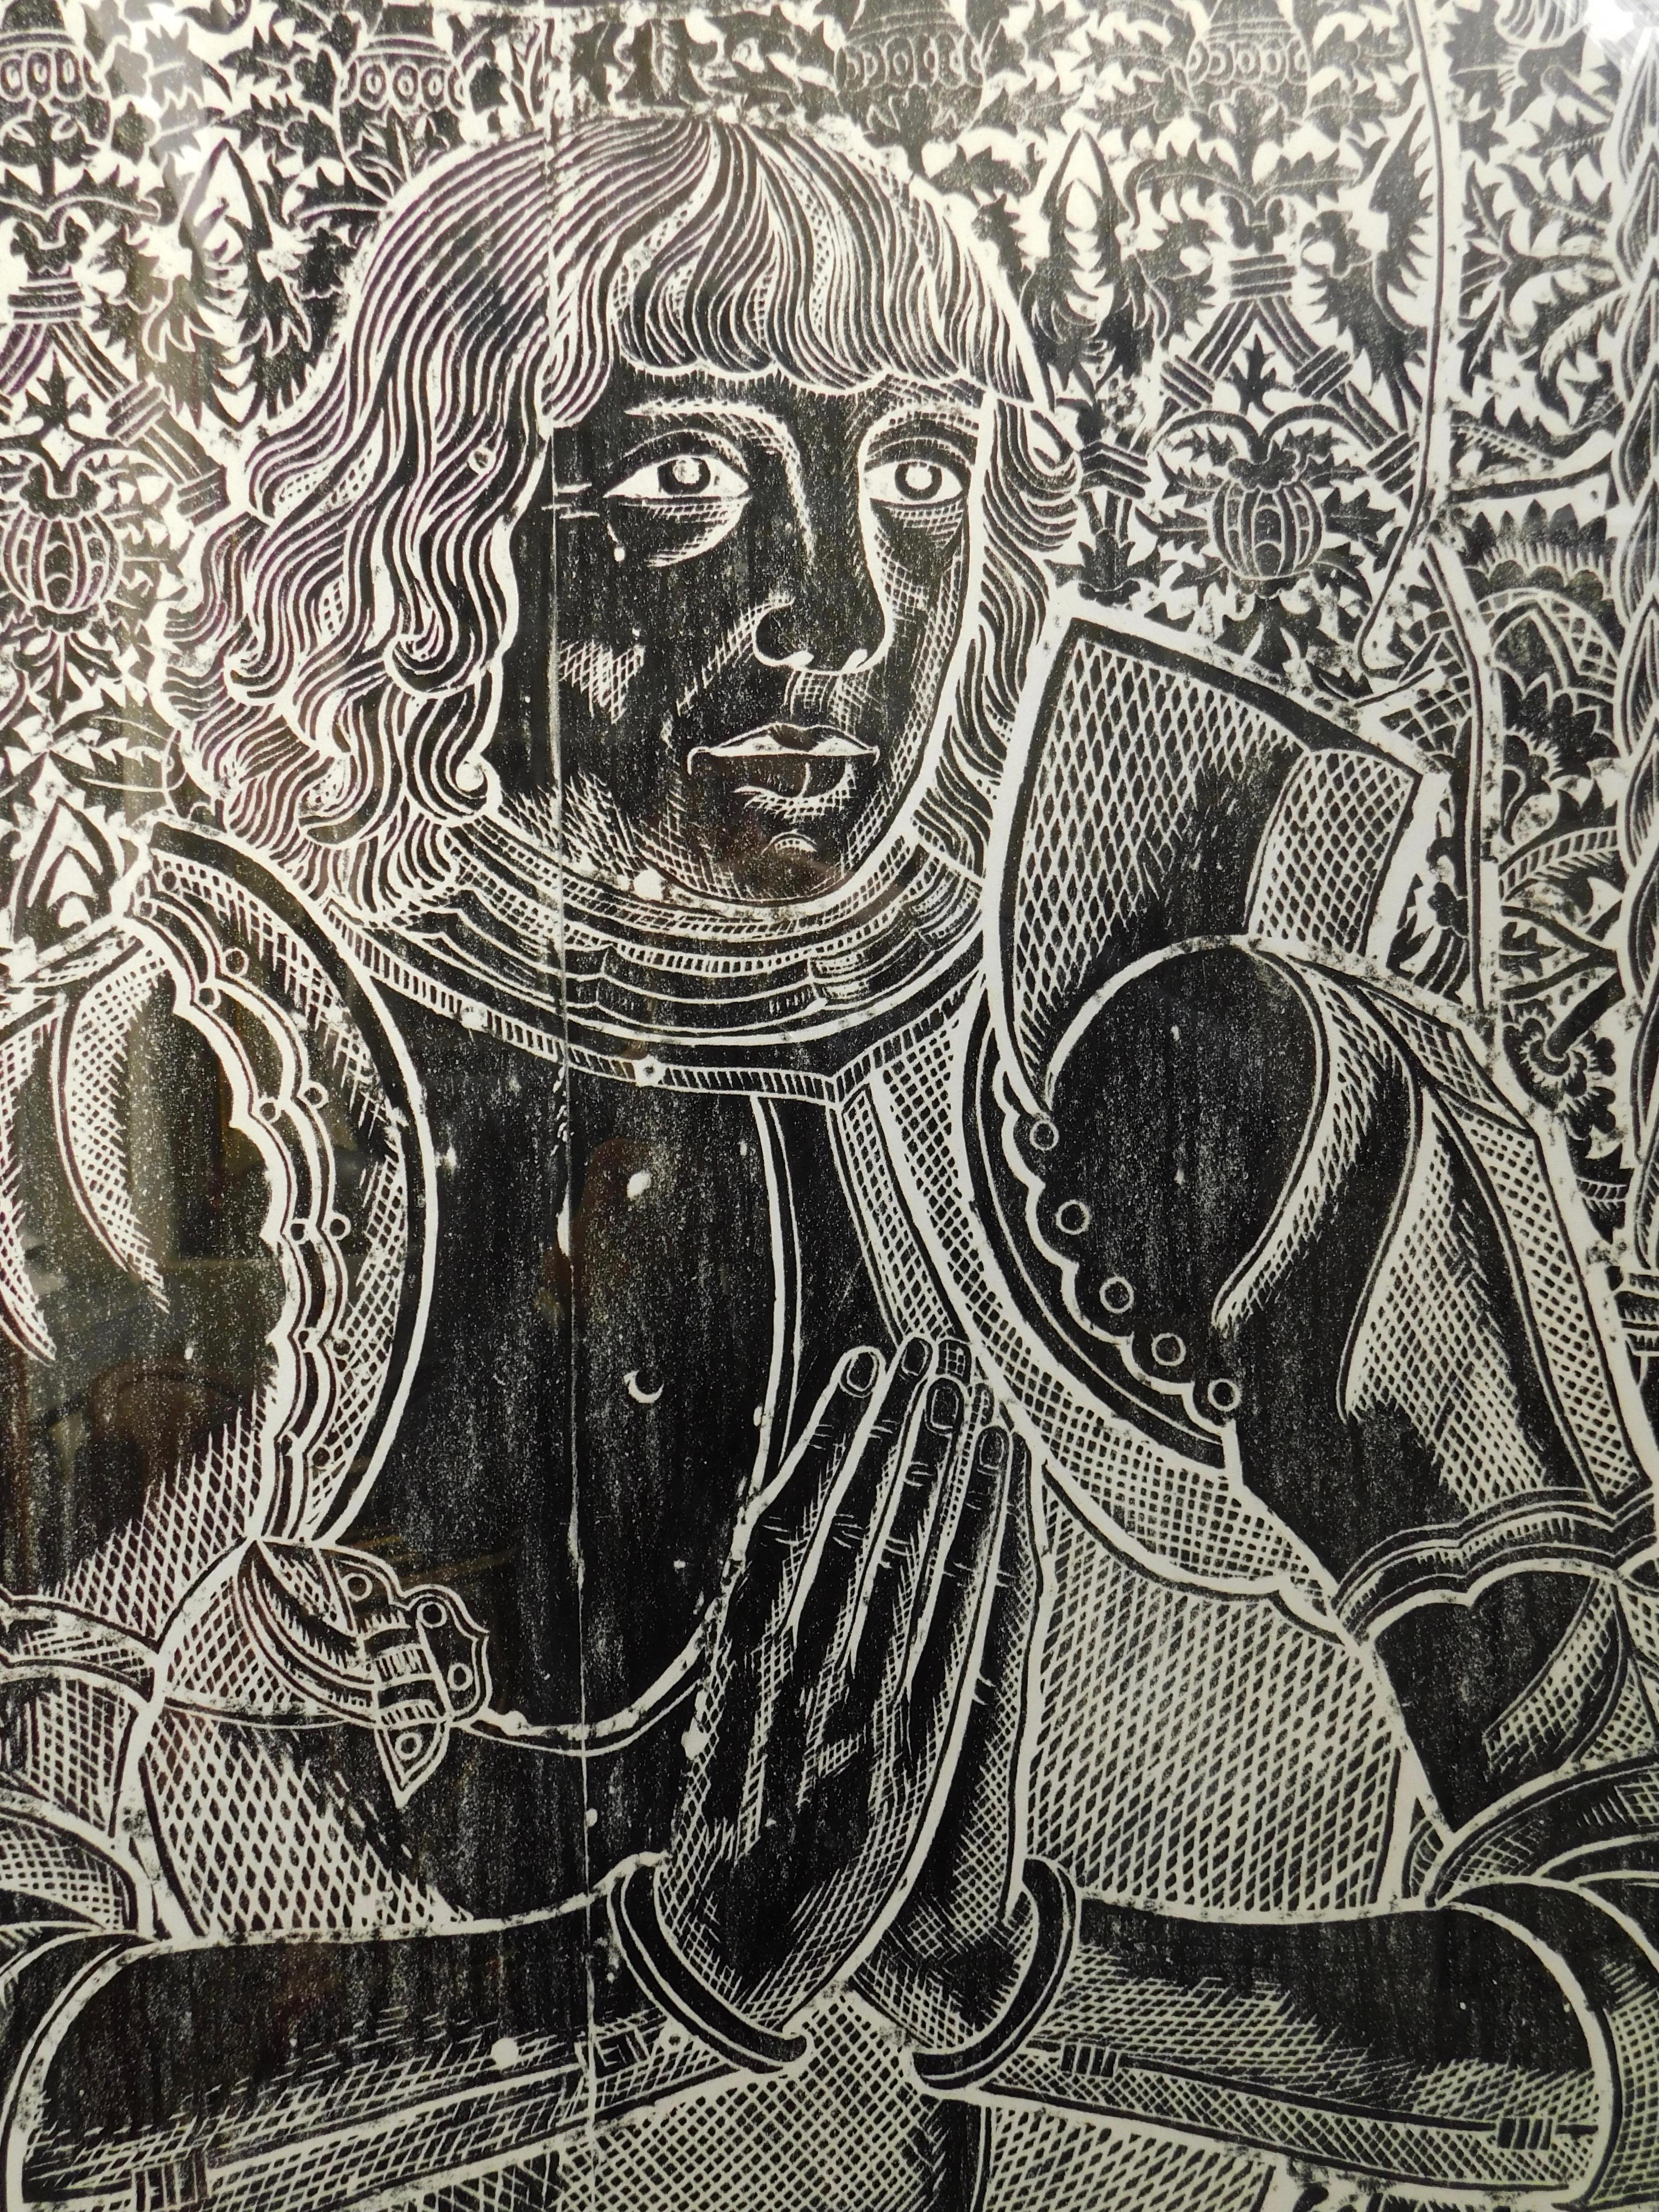 Vintage and Black Wax Rubbing on Paper of a 13th Century English Tomb Carving (Britisch)